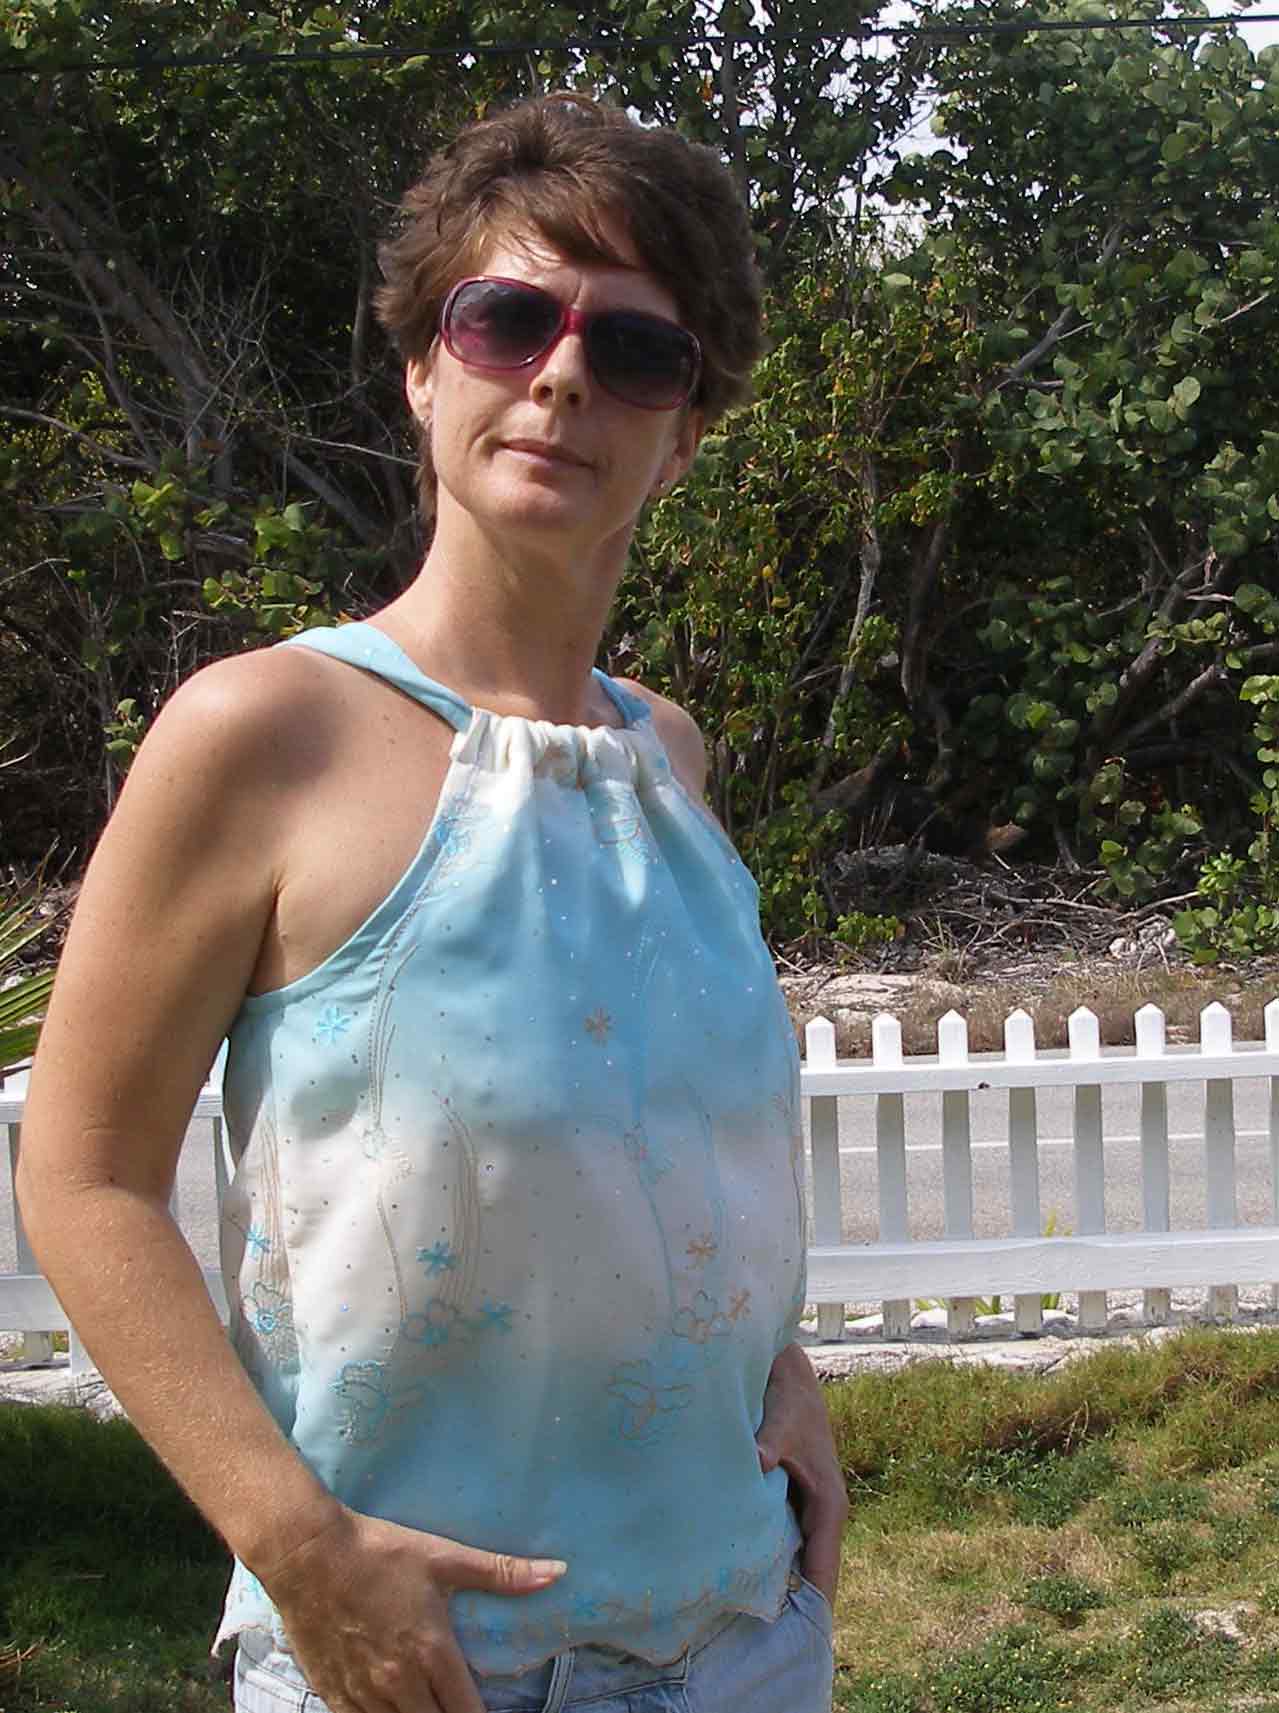 So Sew Easy: Chiffon blouse, free pattern and tutorial